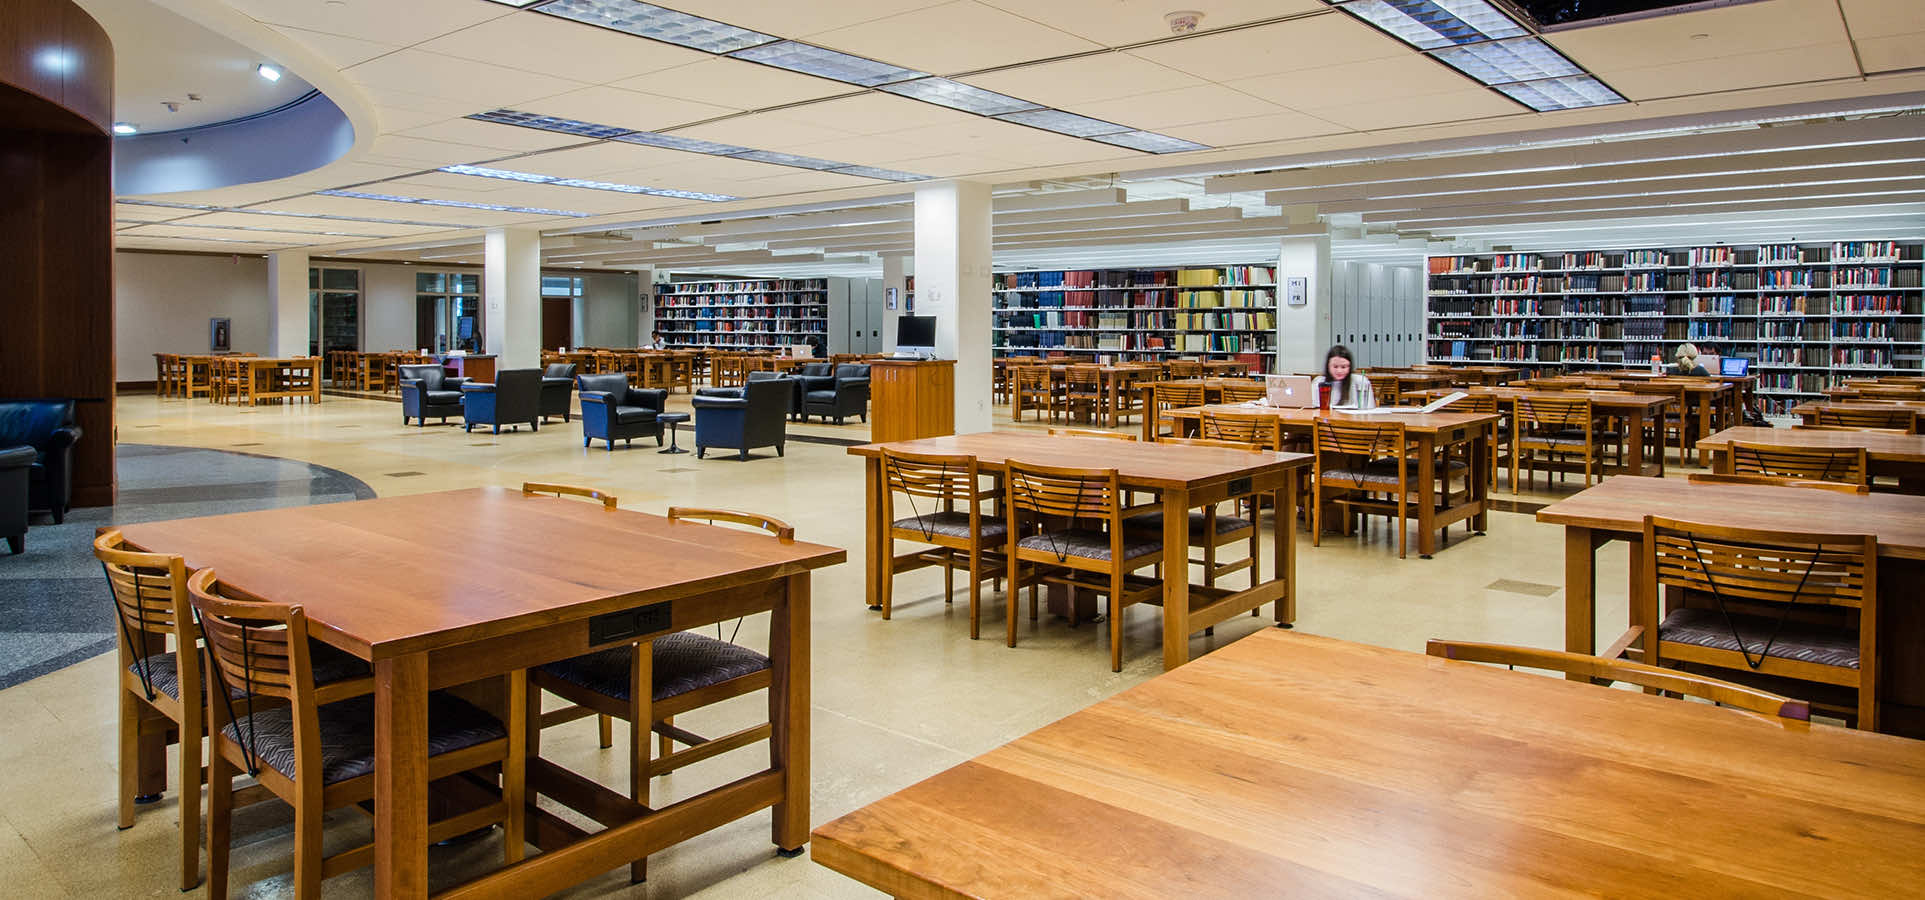 university library reading space with many tables and chairs